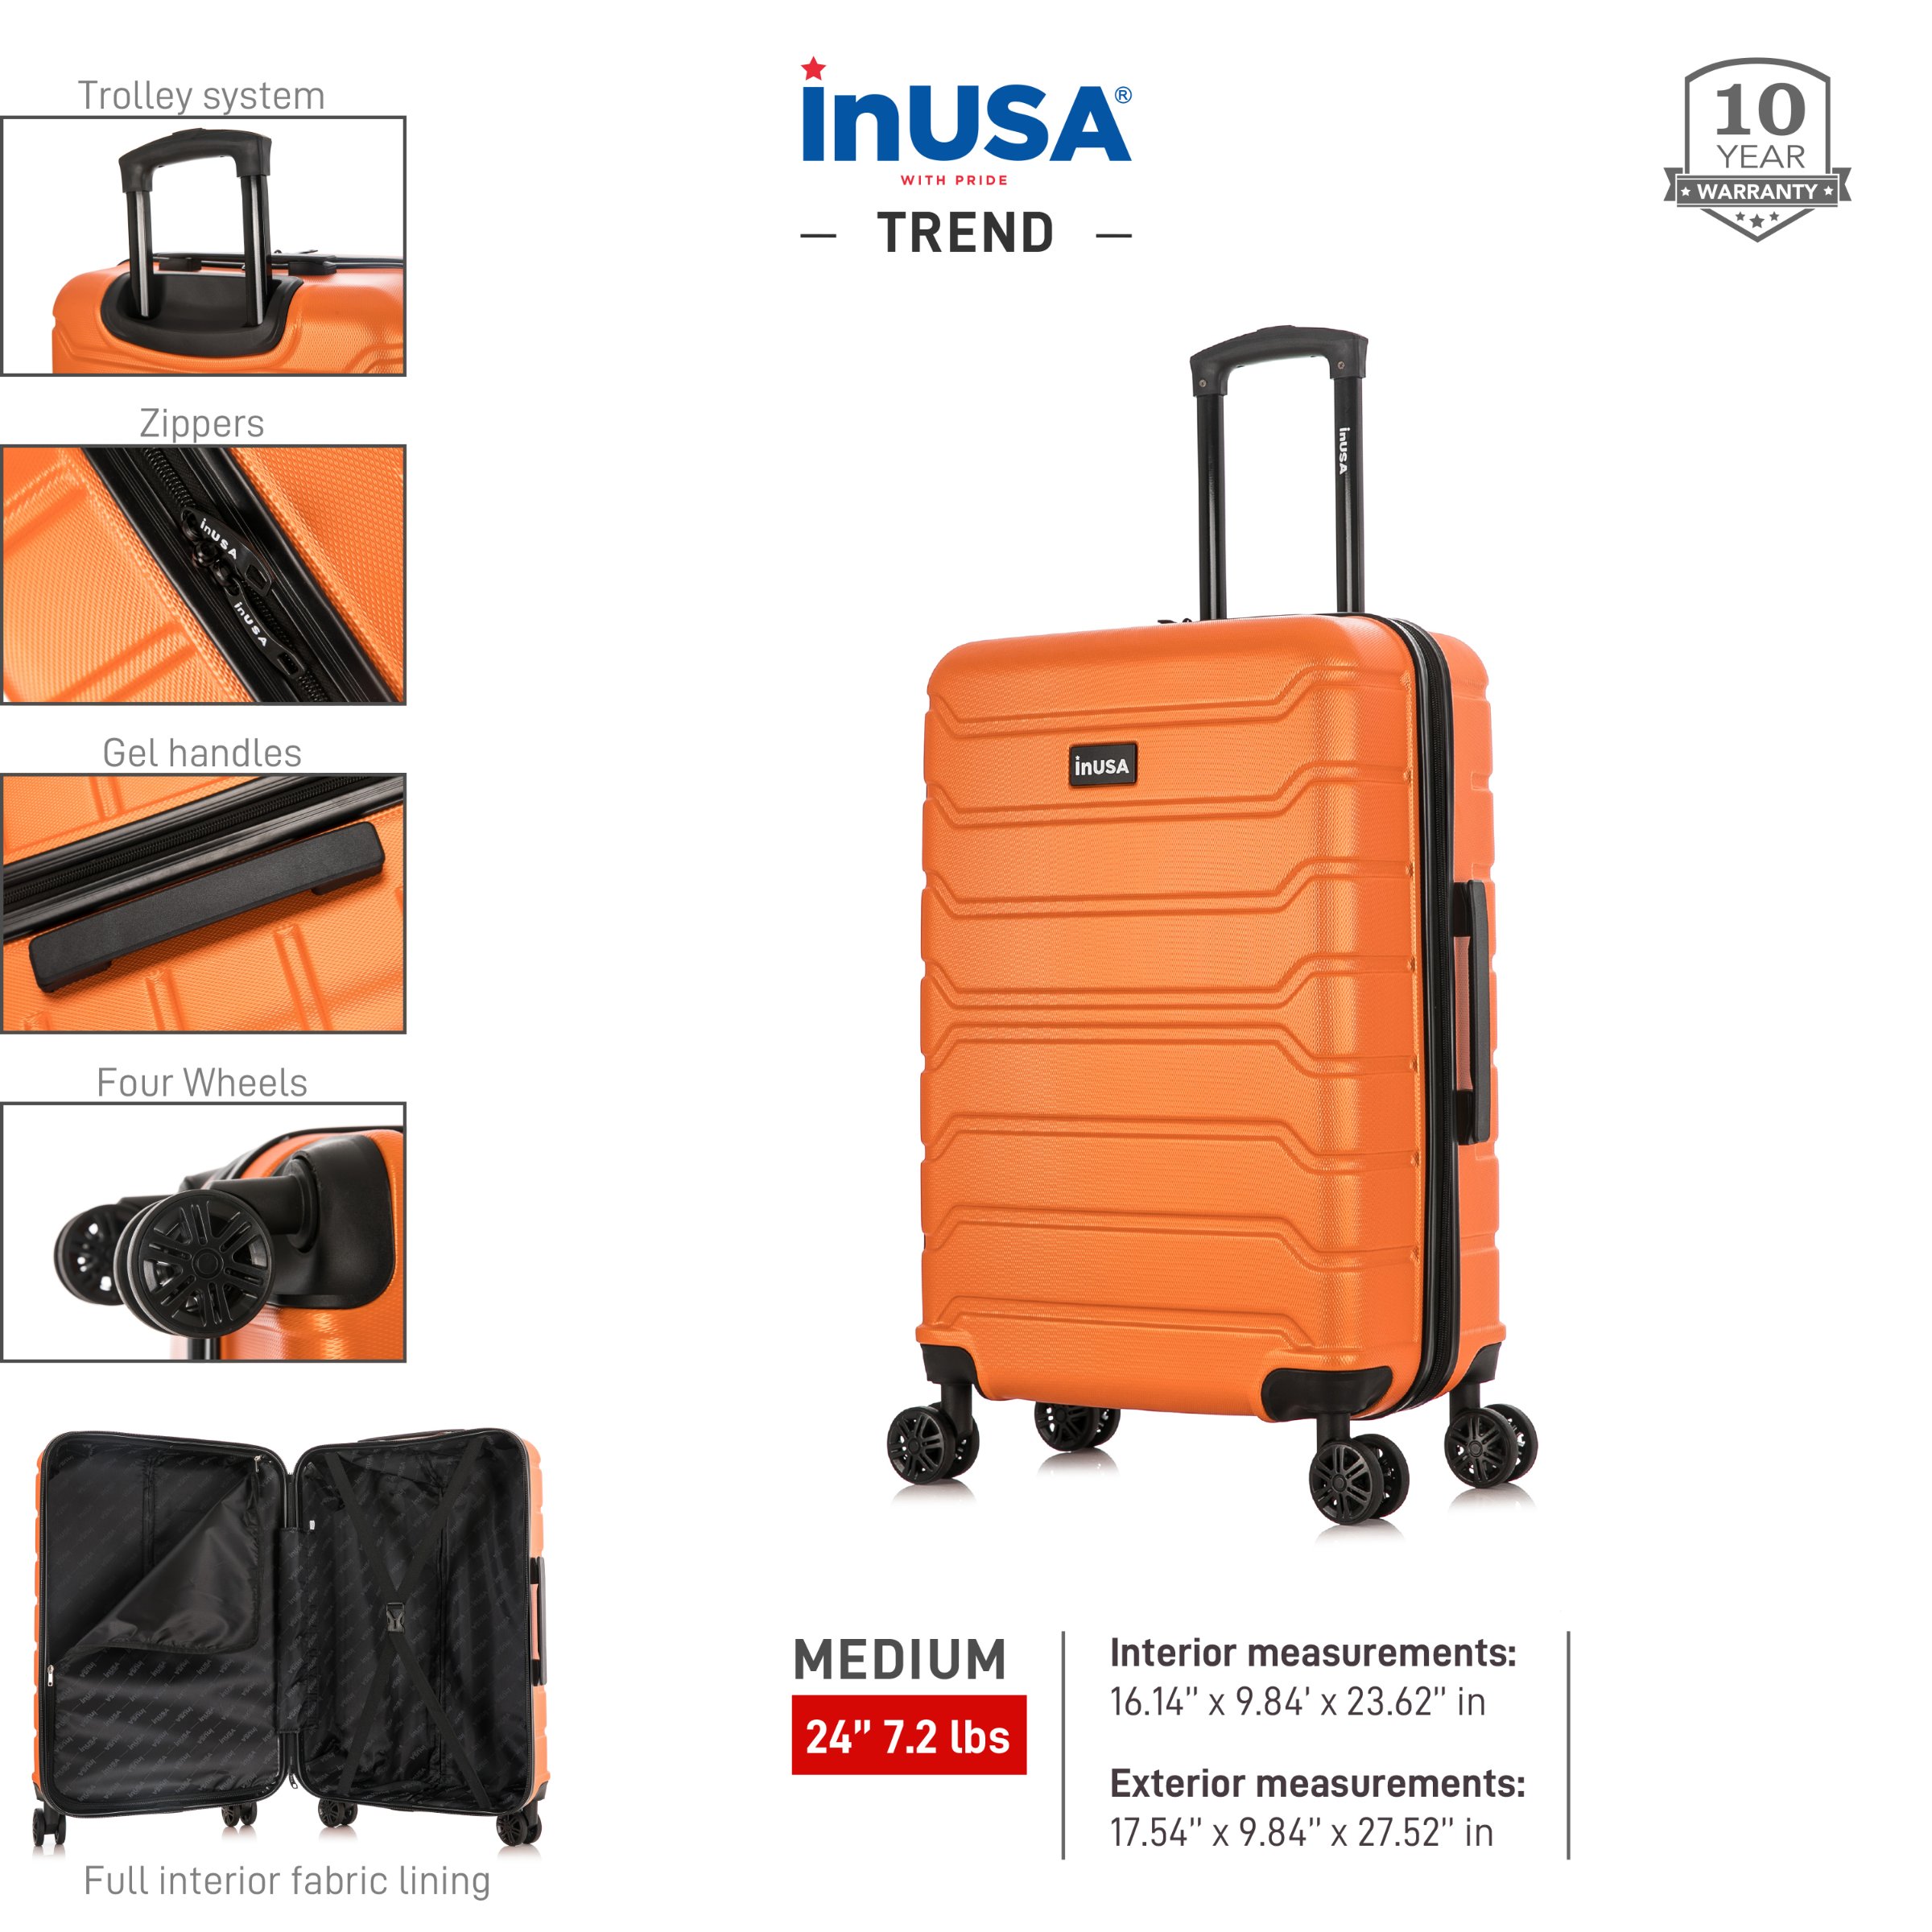 InUSA Trend 24" Hardside Lightweight Luggage with Spinner Wheels, Handle, and Trolley, Orange - image 4 of 12